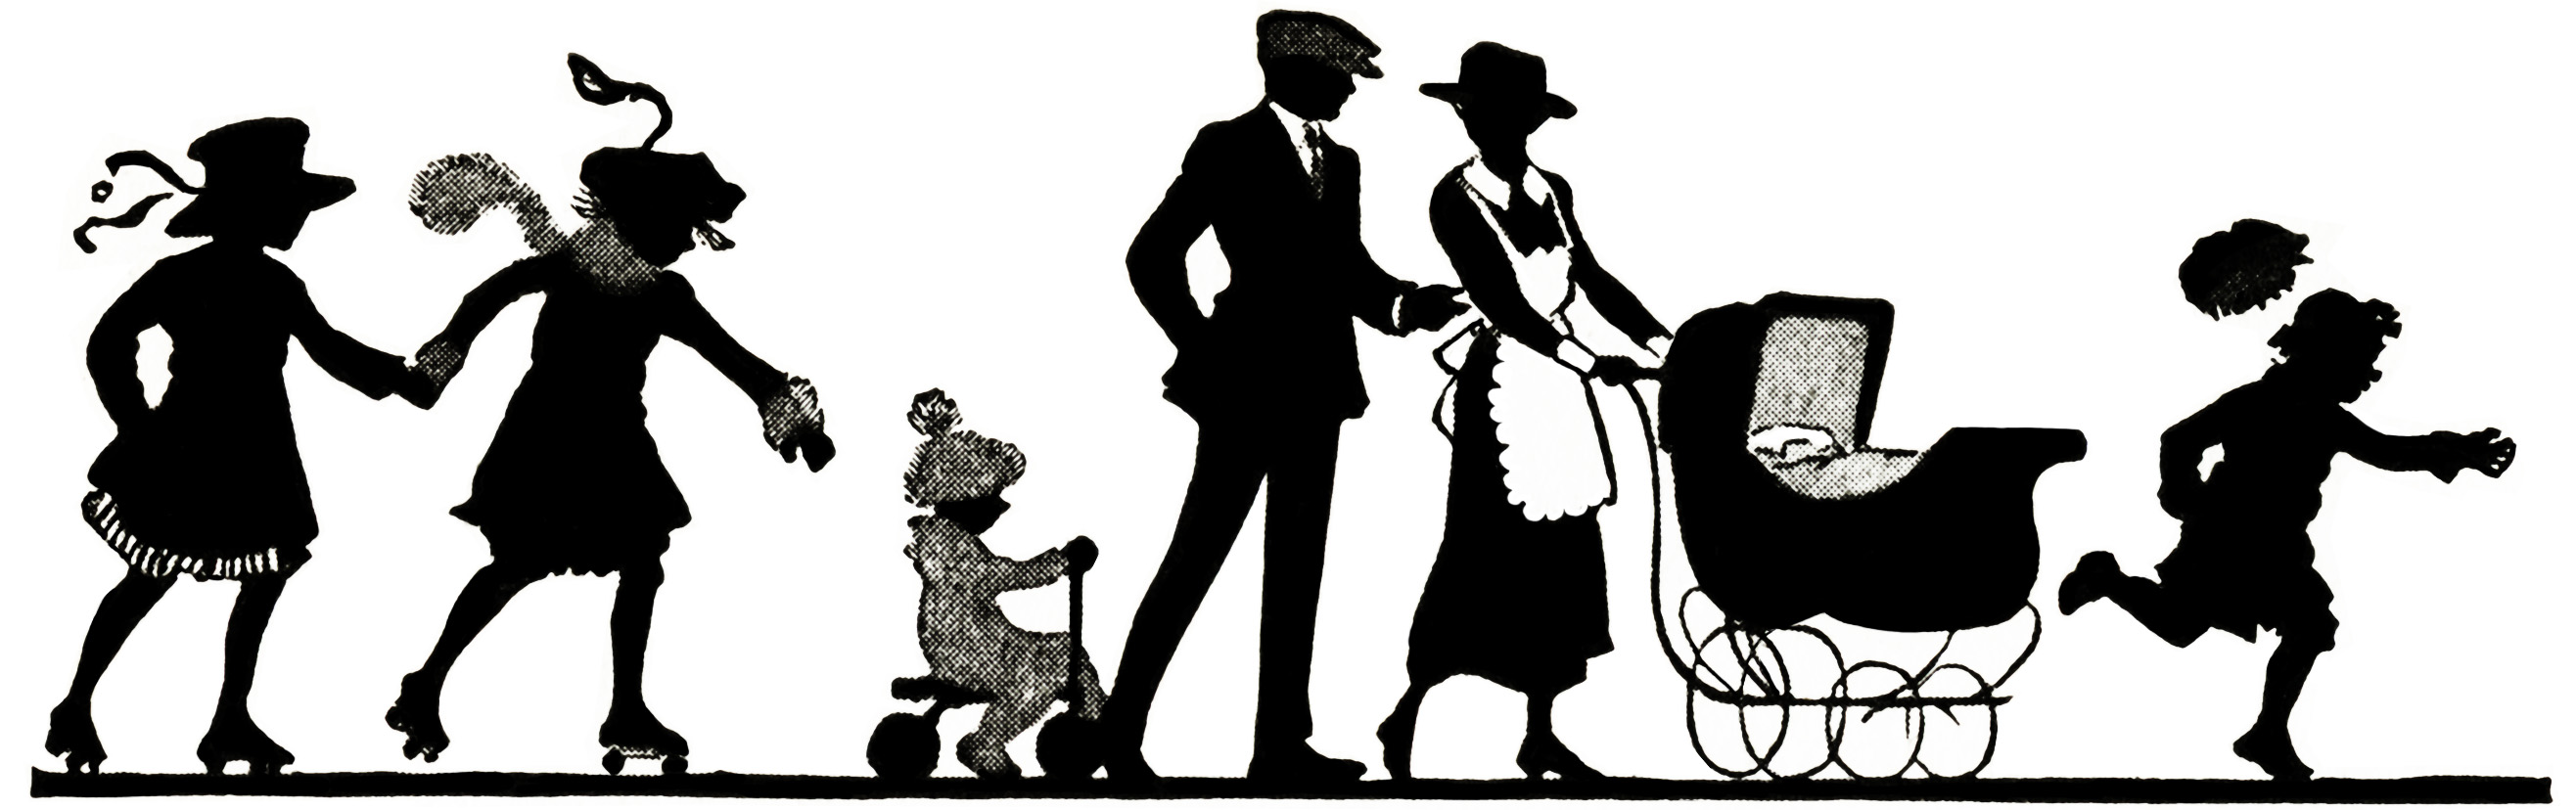 Family Clip Art   Clipart Images   Crazy Gallery